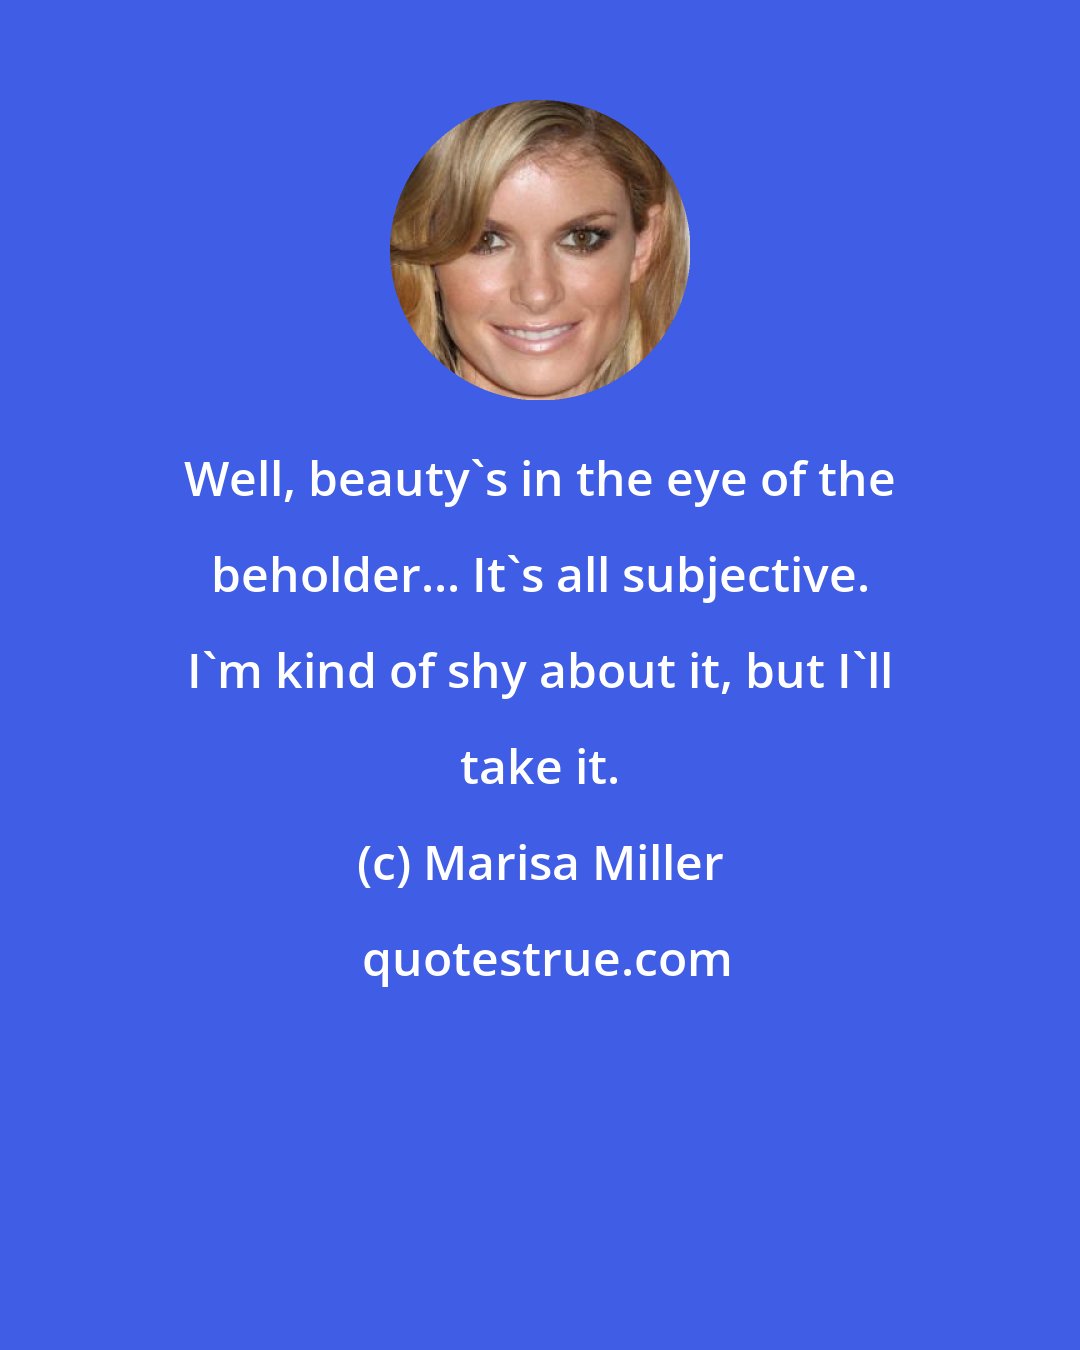 Marisa Miller: Well, beauty's in the eye of the beholder... It's all subjective. I'm kind of shy about it, but I'll take it.